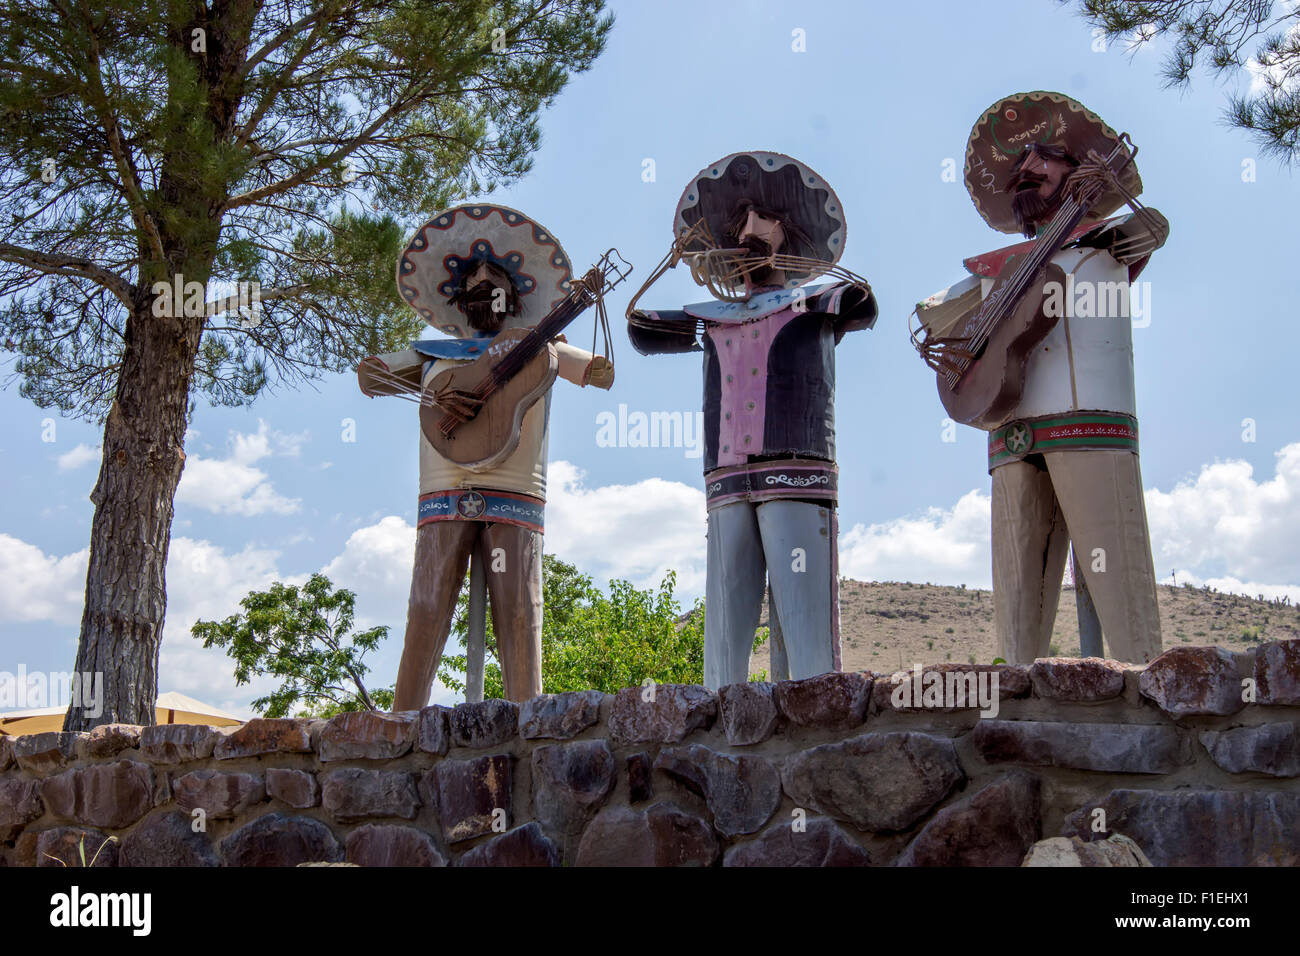 Metal sculptures of traditional Mexican mariachis in Baines Park, a small public park in Alpine, west Texas. Stock Photo